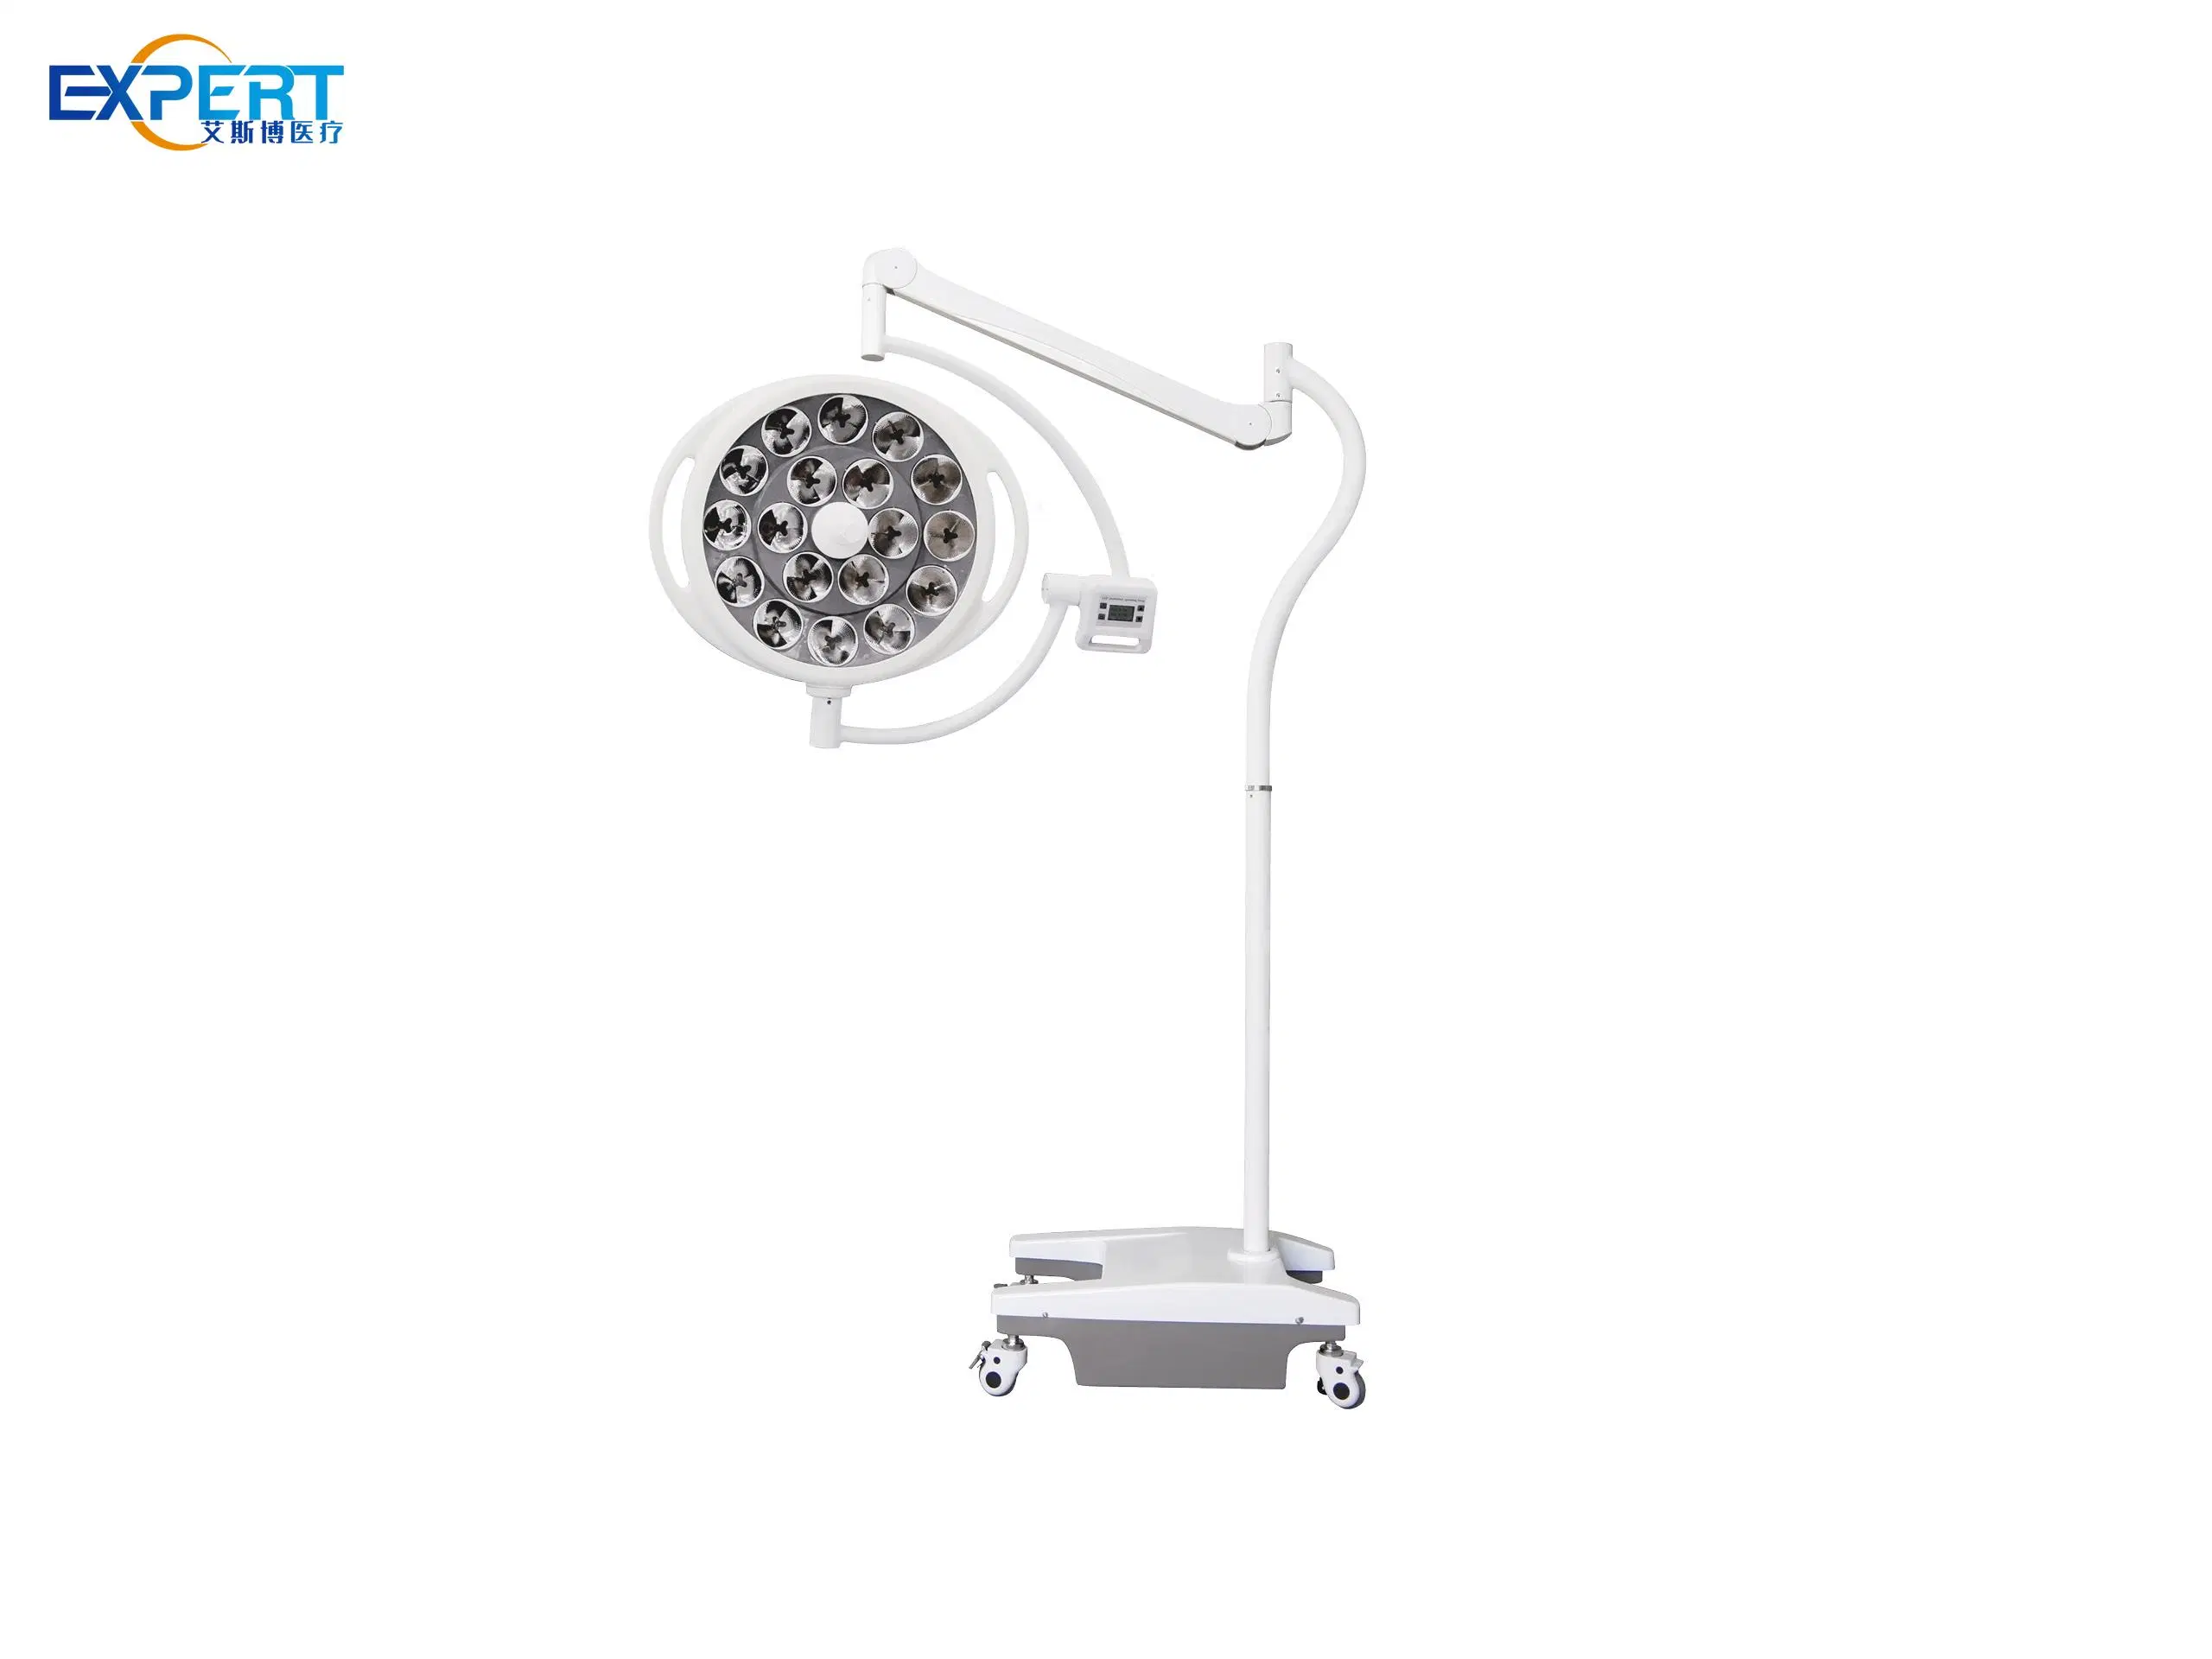 Factory China Made Stand Type Surgical Halogen Illuminating LED Operating Lamp for Hospital Room Equipment Mobile Light